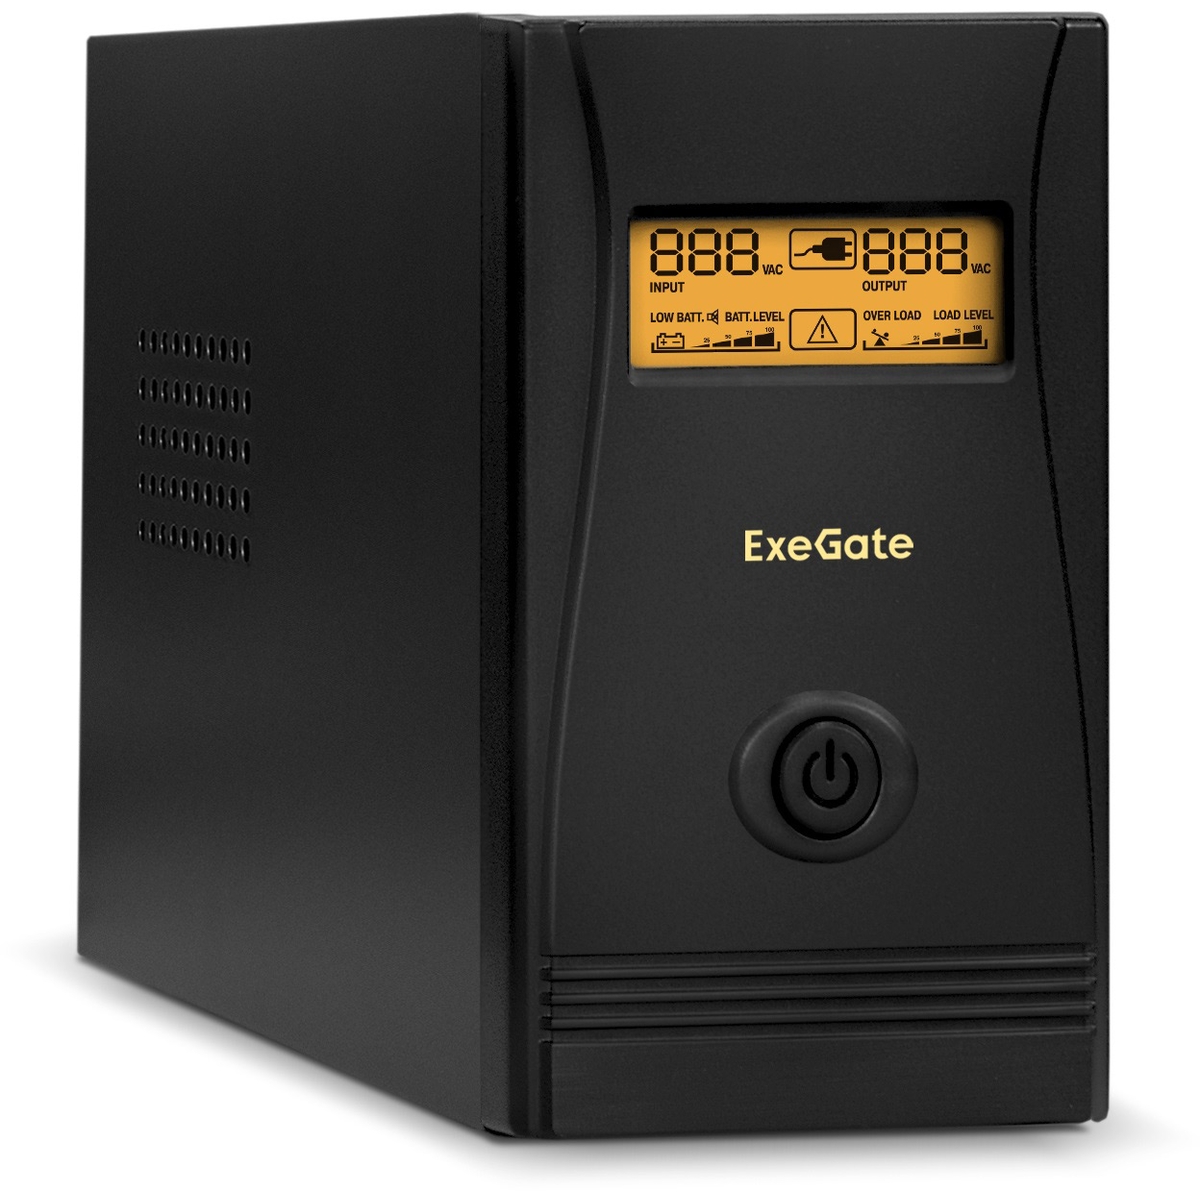  ExeGate SpecialPro Smart LLB-400.LCD.AVR.2SH